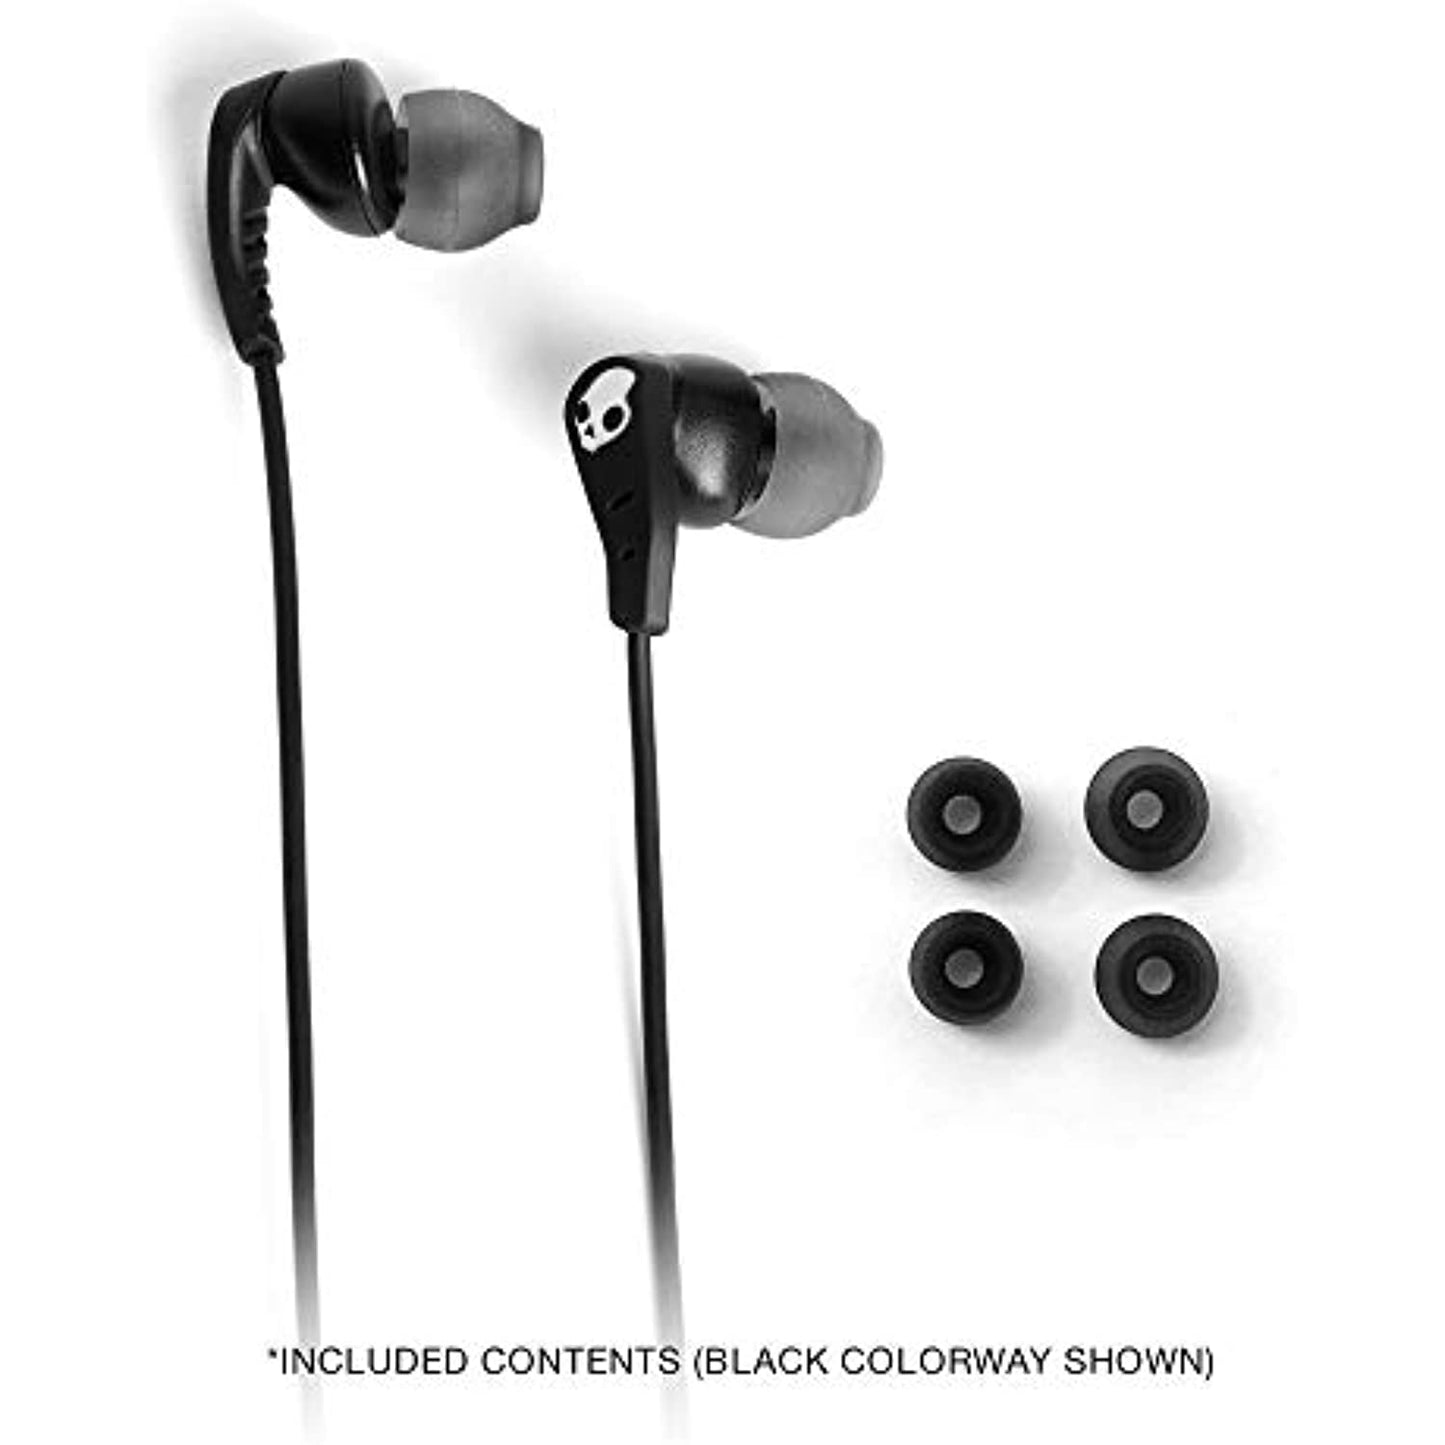 Skullcandy Set USB-C In-Ear Wired Earbuds with Microphone Sweat Water Resistant IPX4 Sport Earphones (True Black, Chill Grey/Yellow)